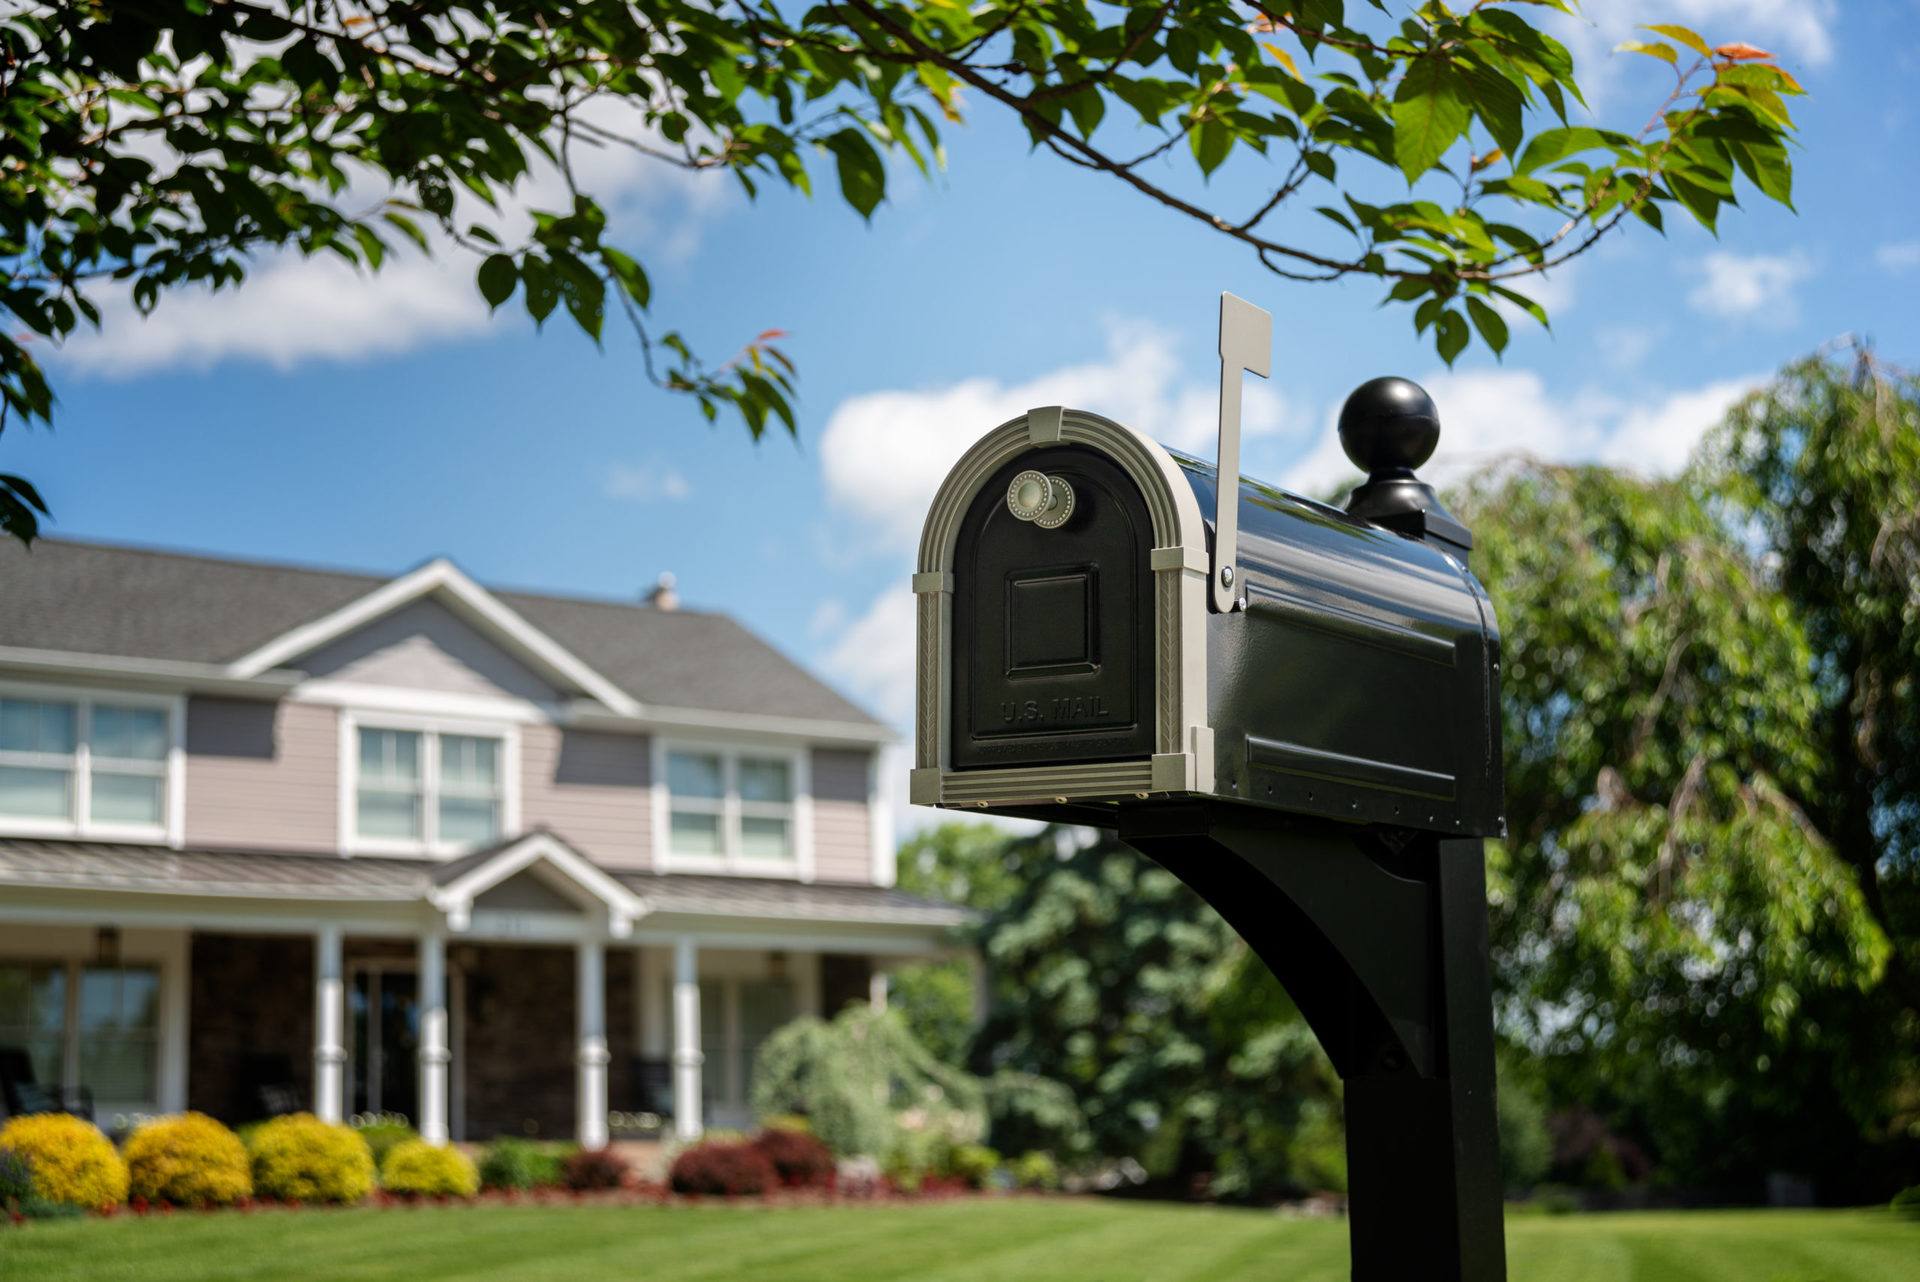 decorative black mailbox with satin nickel trim in front of home